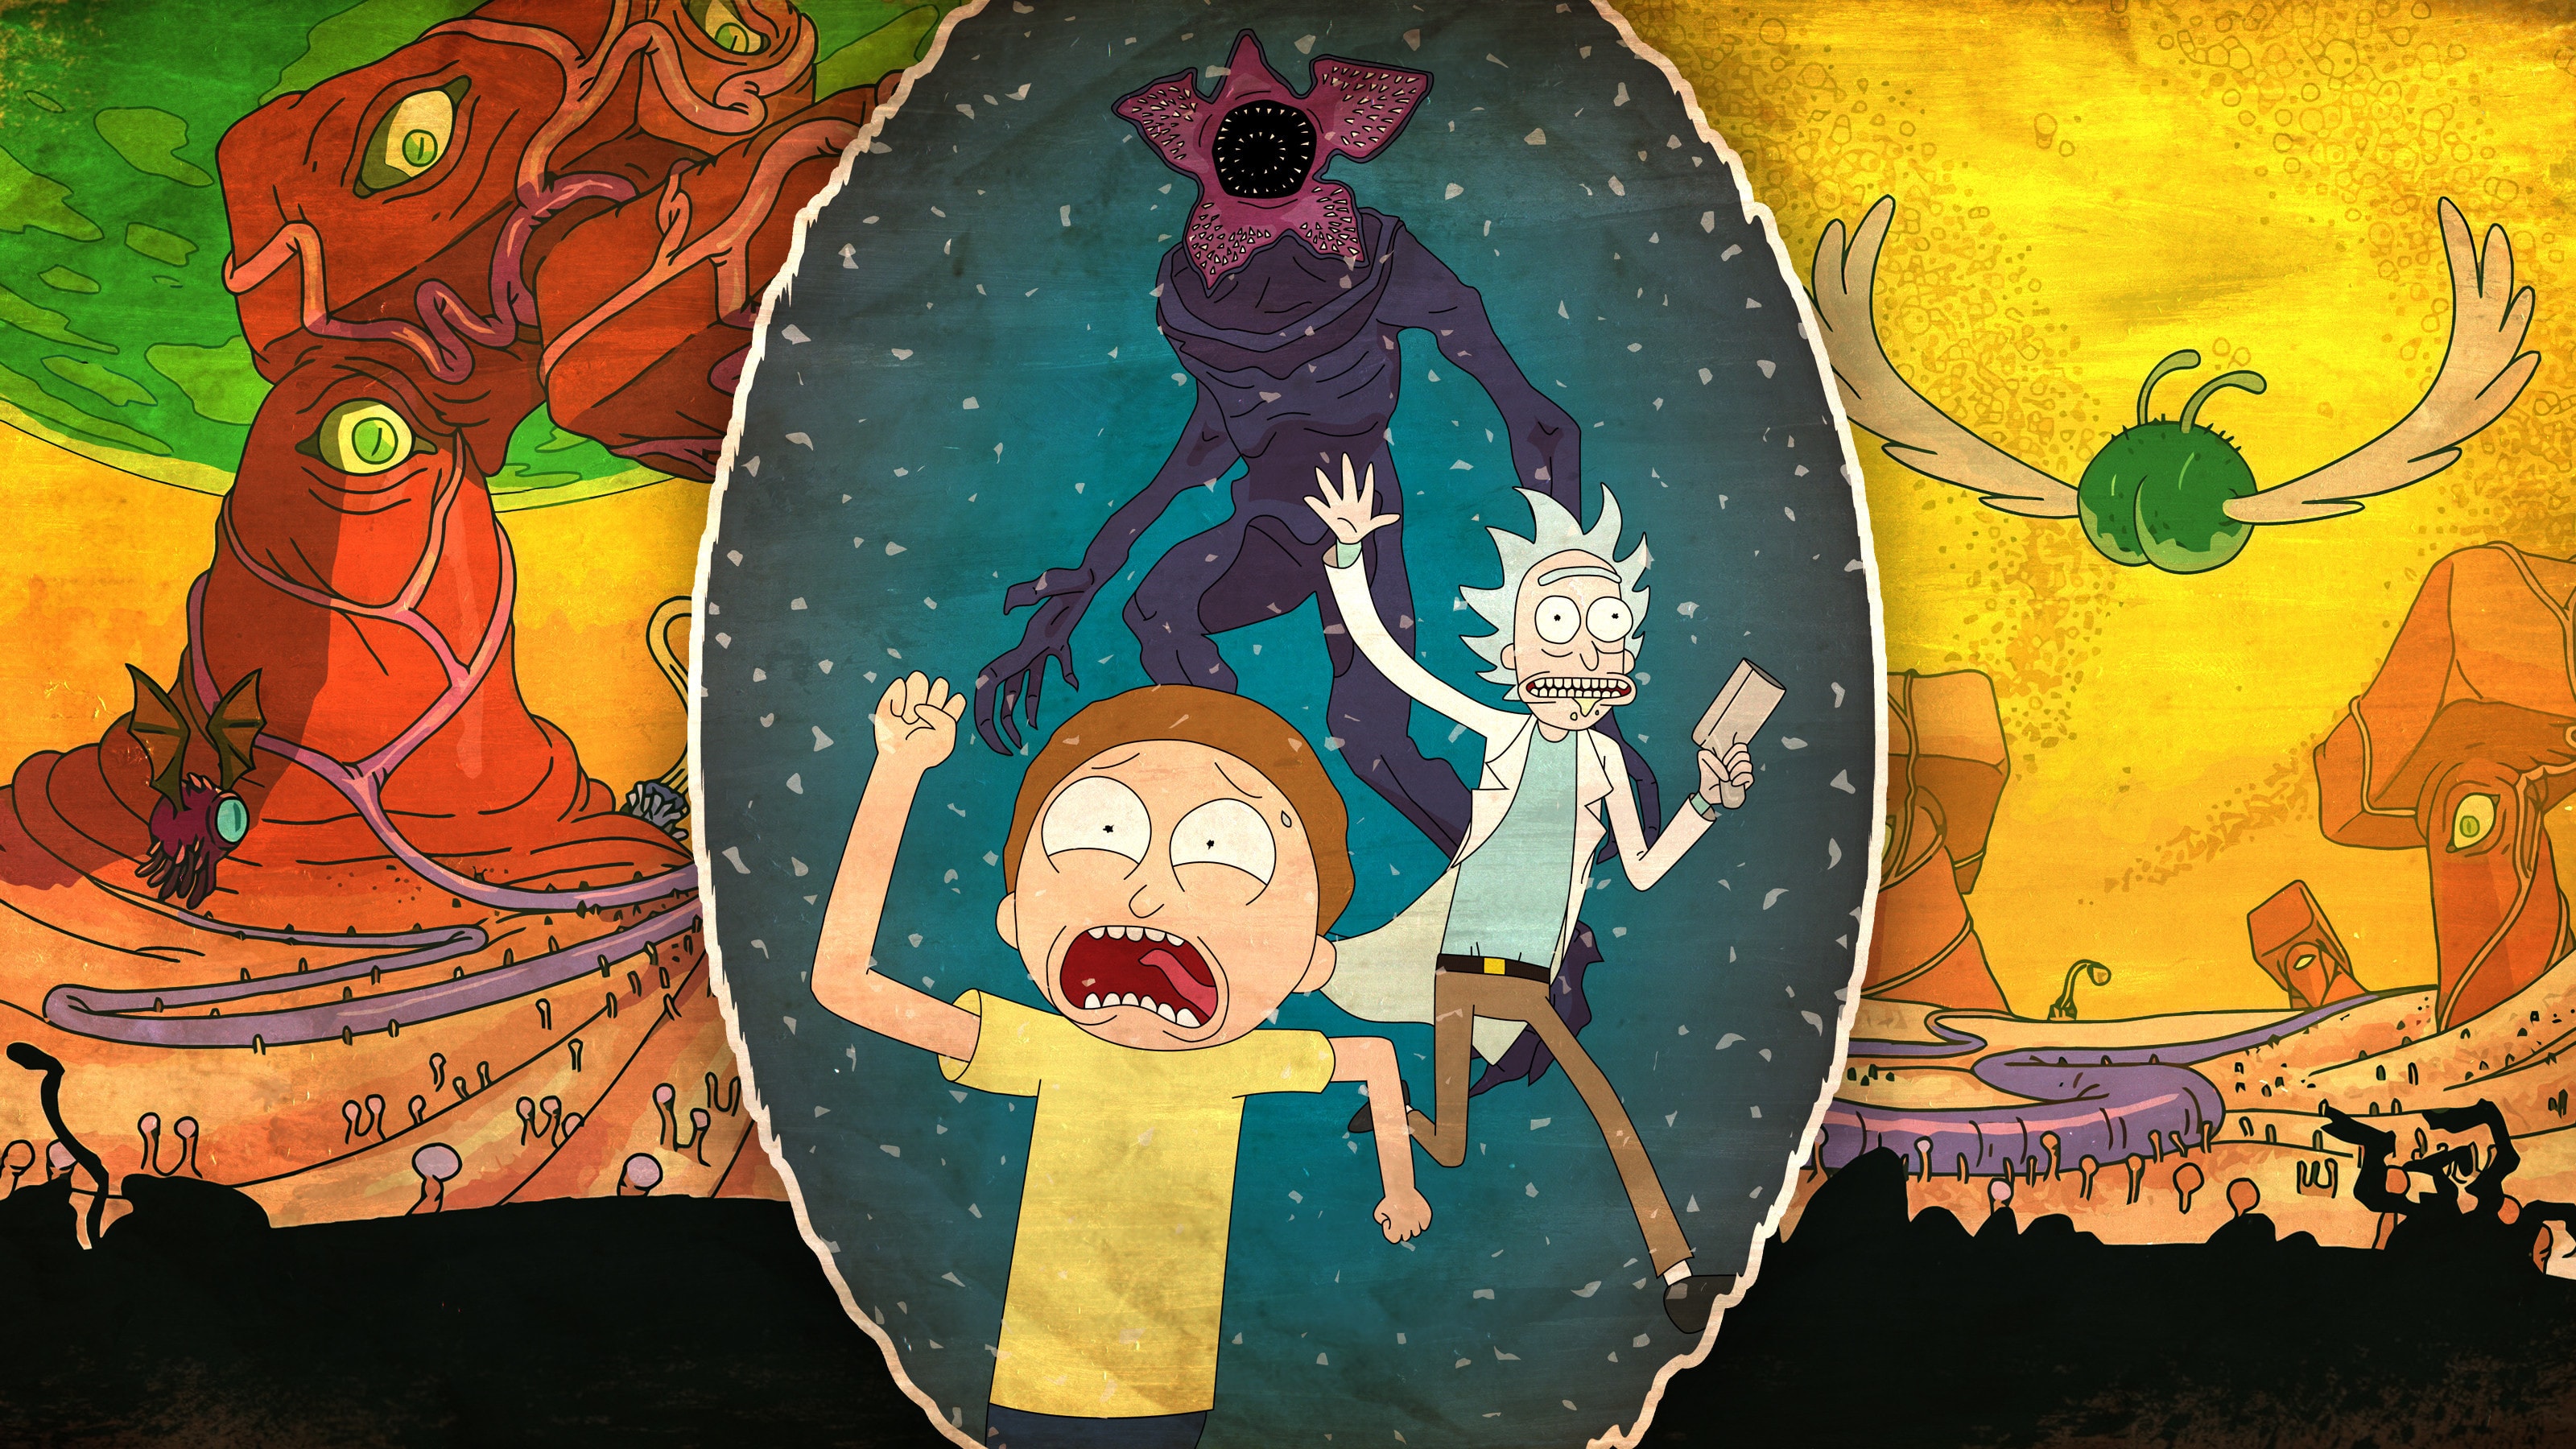 Epic colourful Space background  Rick and morty poster Iphone wallpaper  rick and morty Rick and morty image